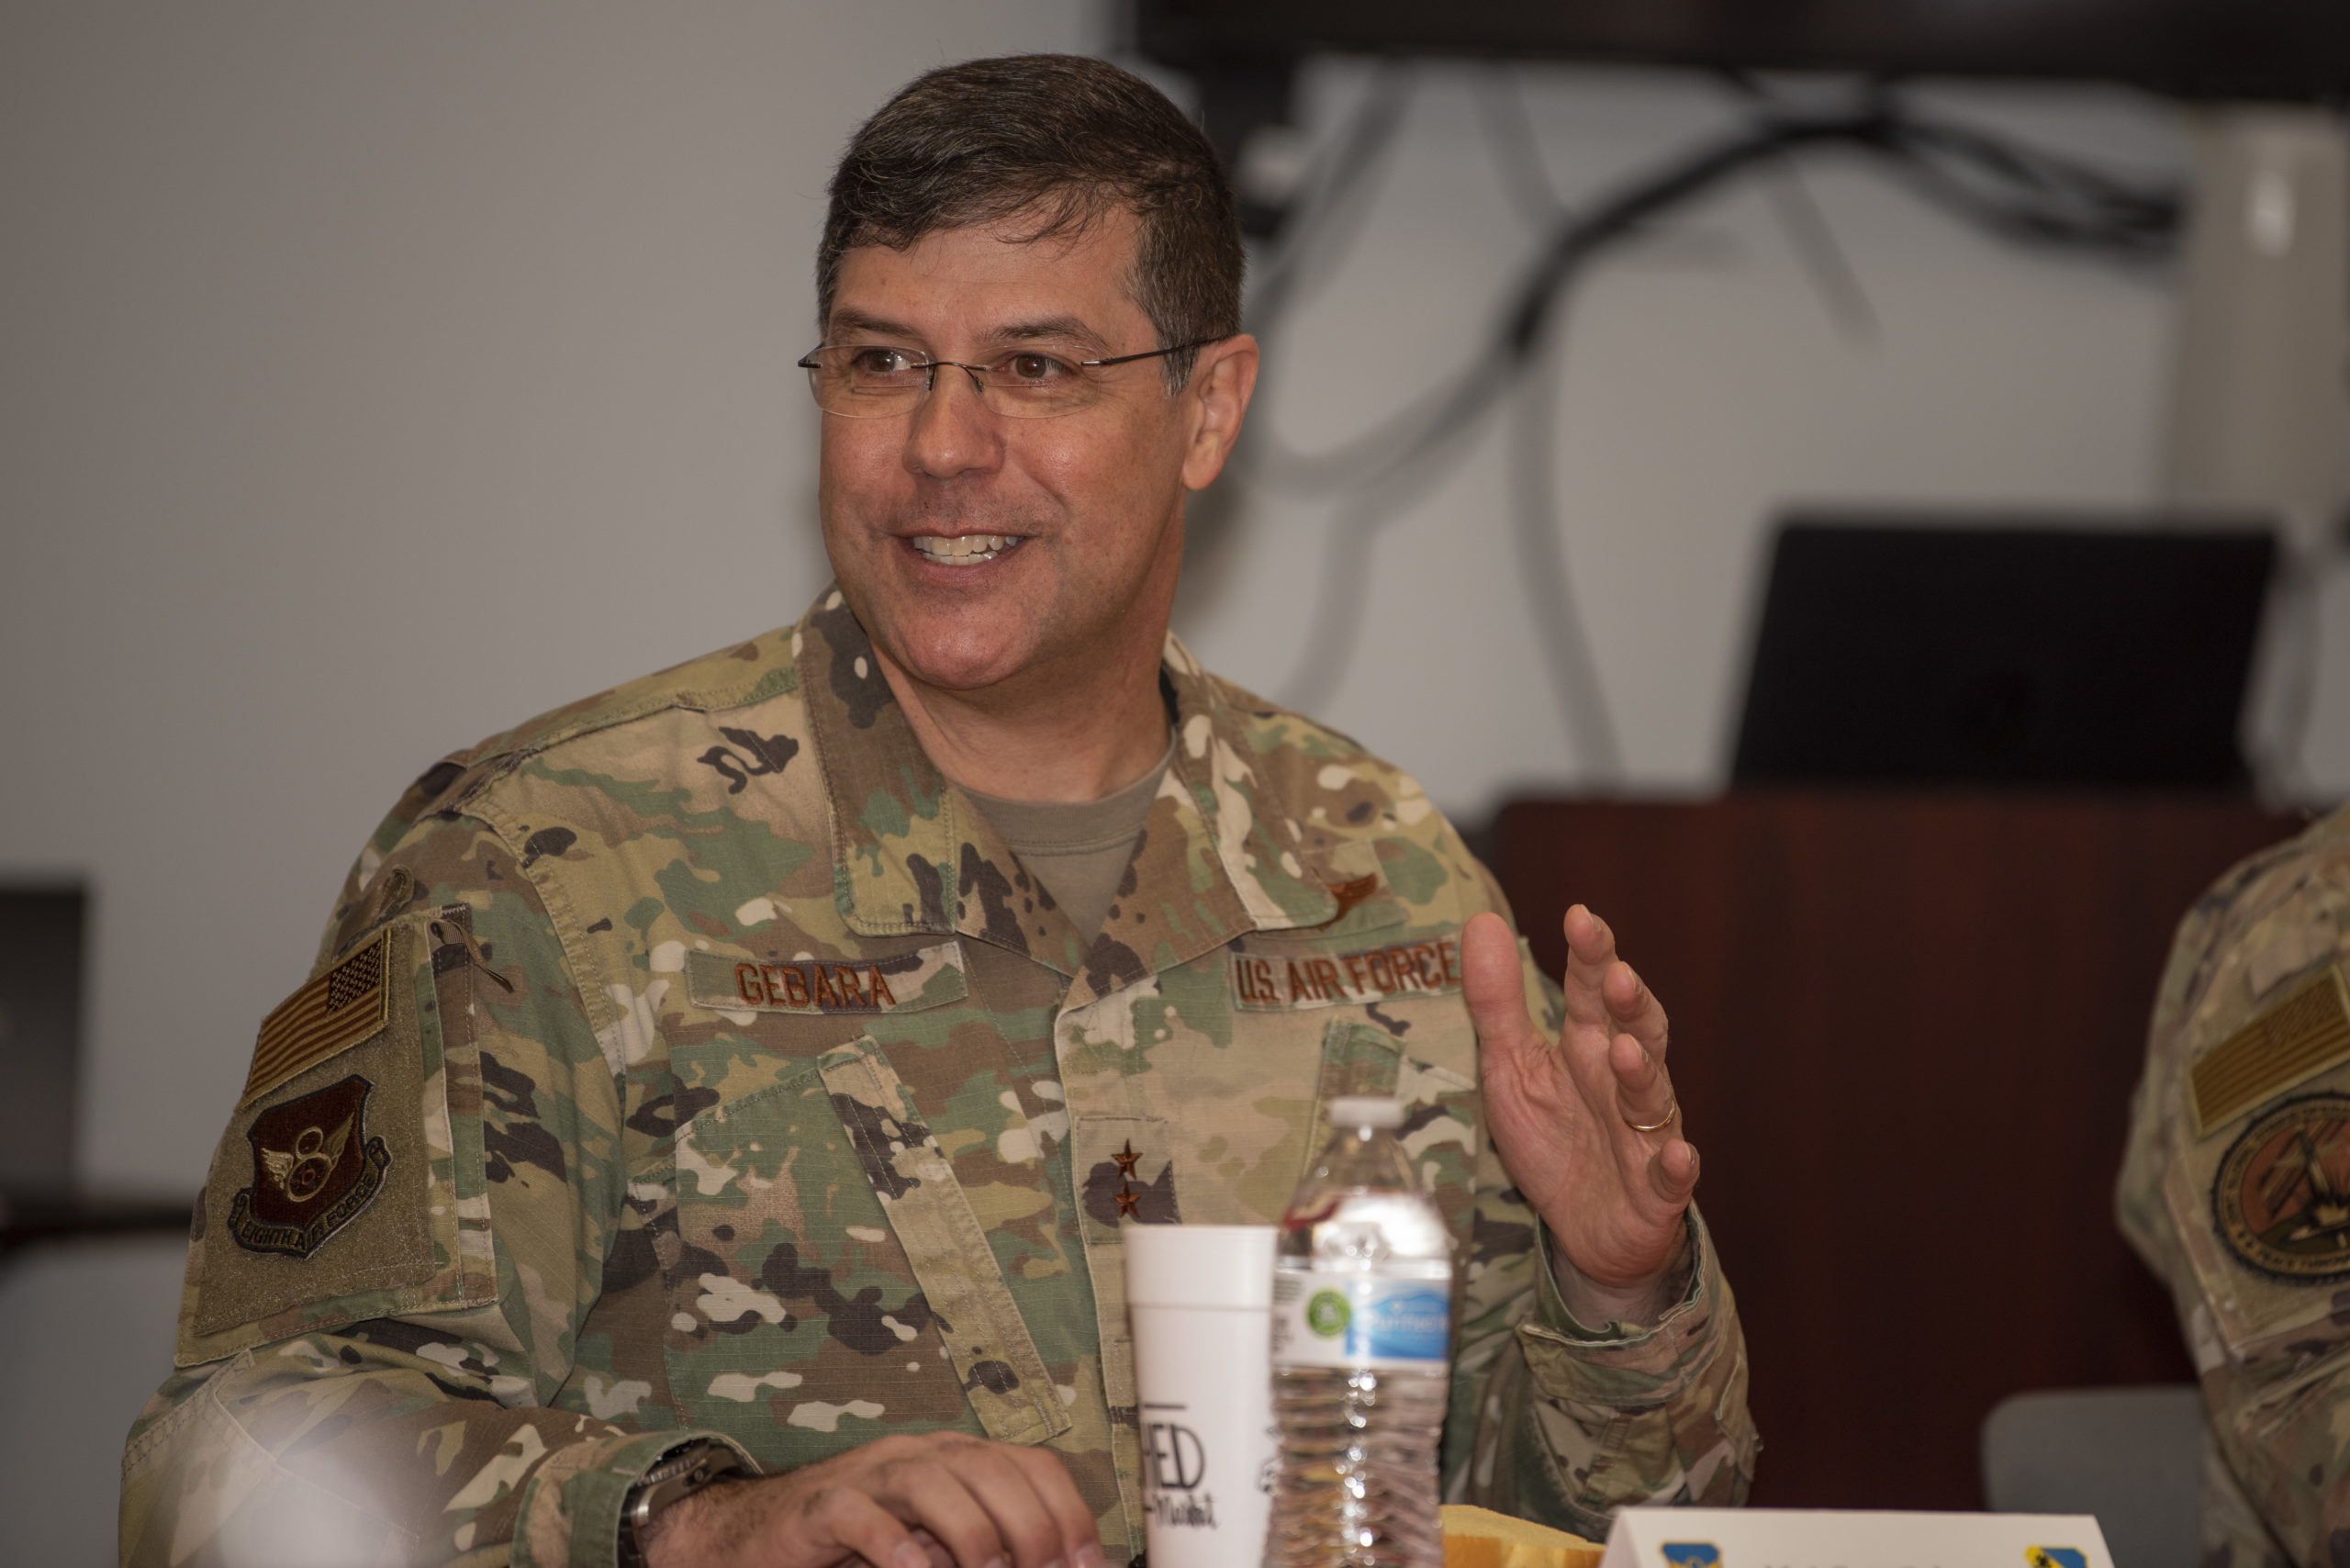 Gebara Tapped for Promotion; as 3-Star, Will Lead Nuclear Deterrence